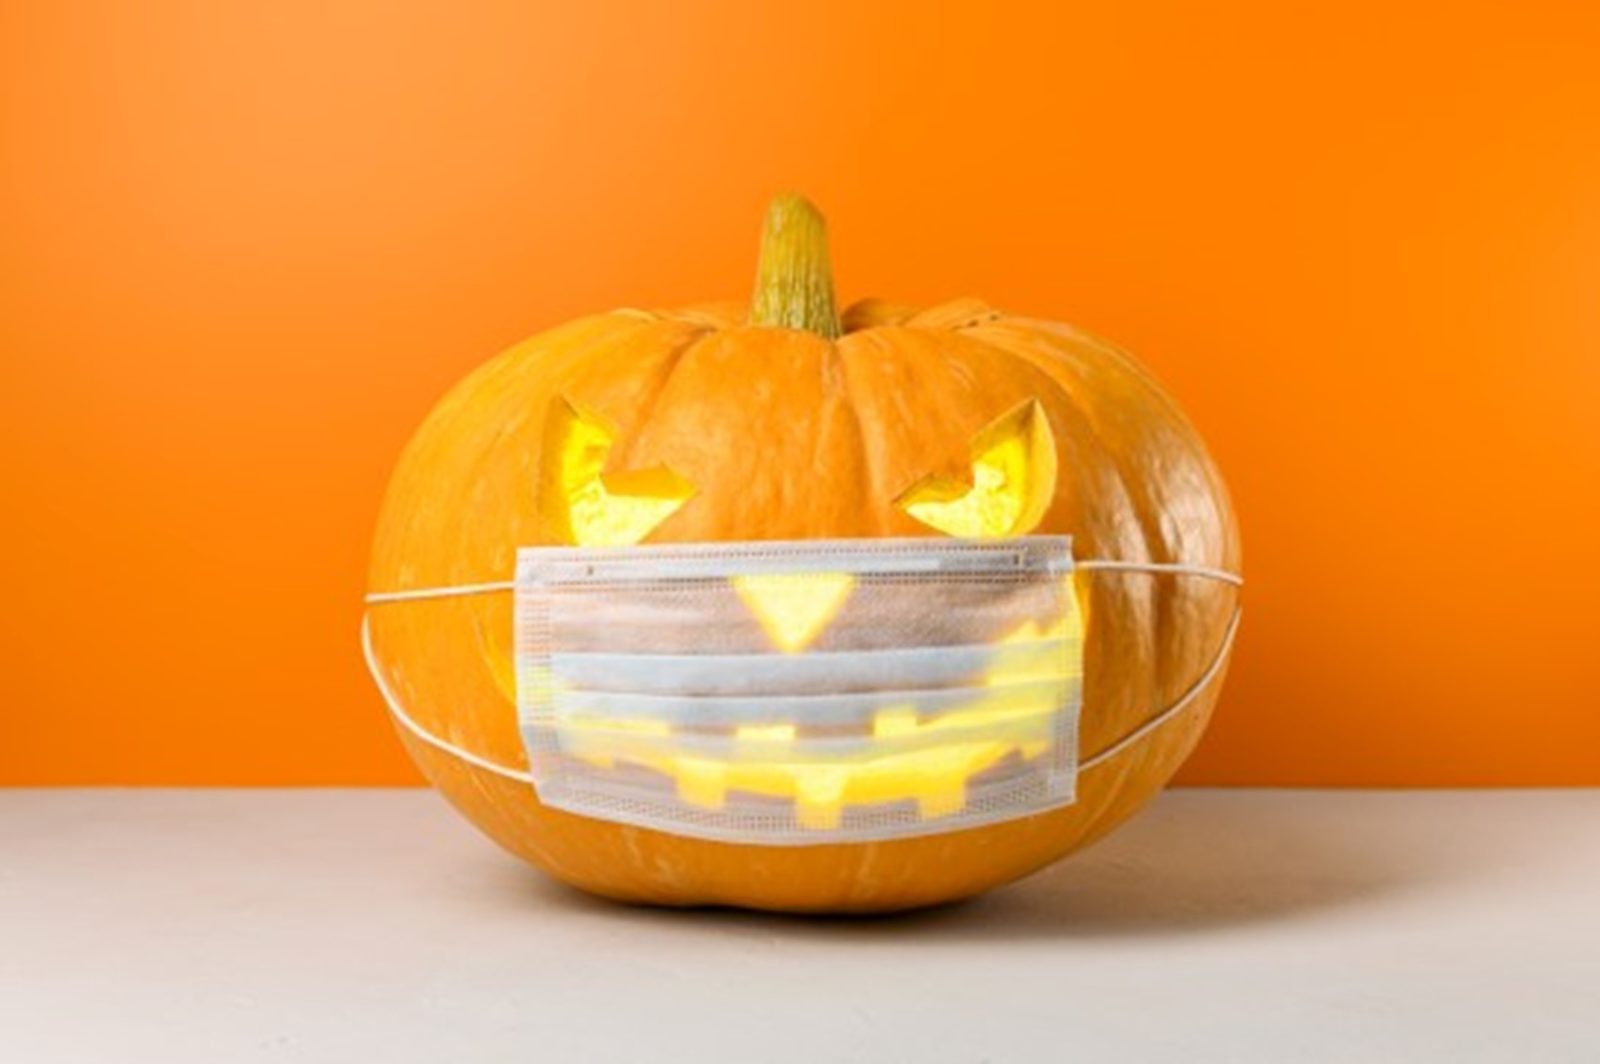 Halloween jack-o-lantern wears a face mask to prevent disease transmission